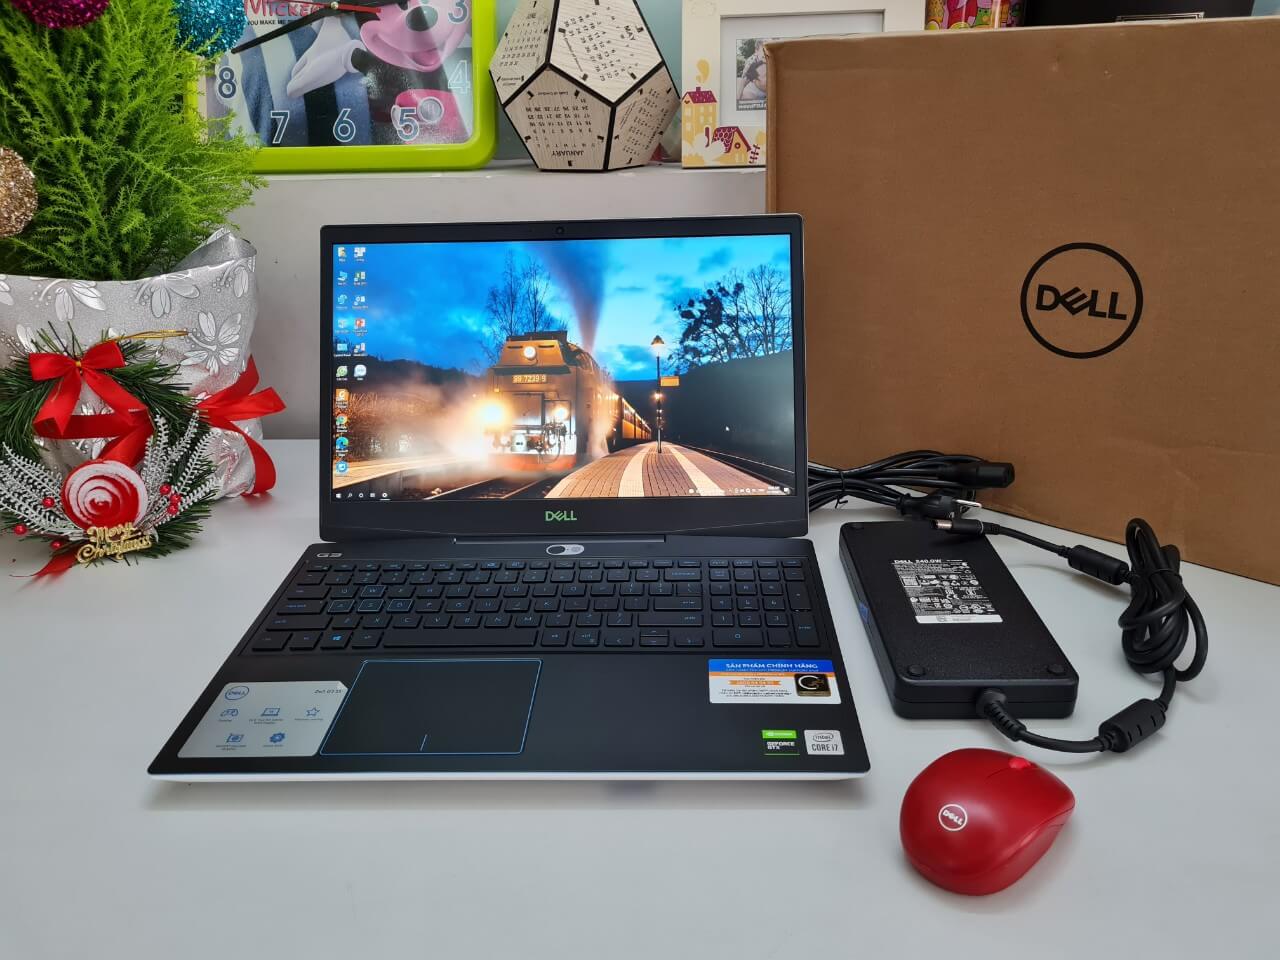 Dell Gaming G3 3500 G3500Bw Core i7-10750H/ 16GB/ 512GB/ GTX 1660Ti 6GB/ 15.6 inch FHD/ Win 10/ Trắng